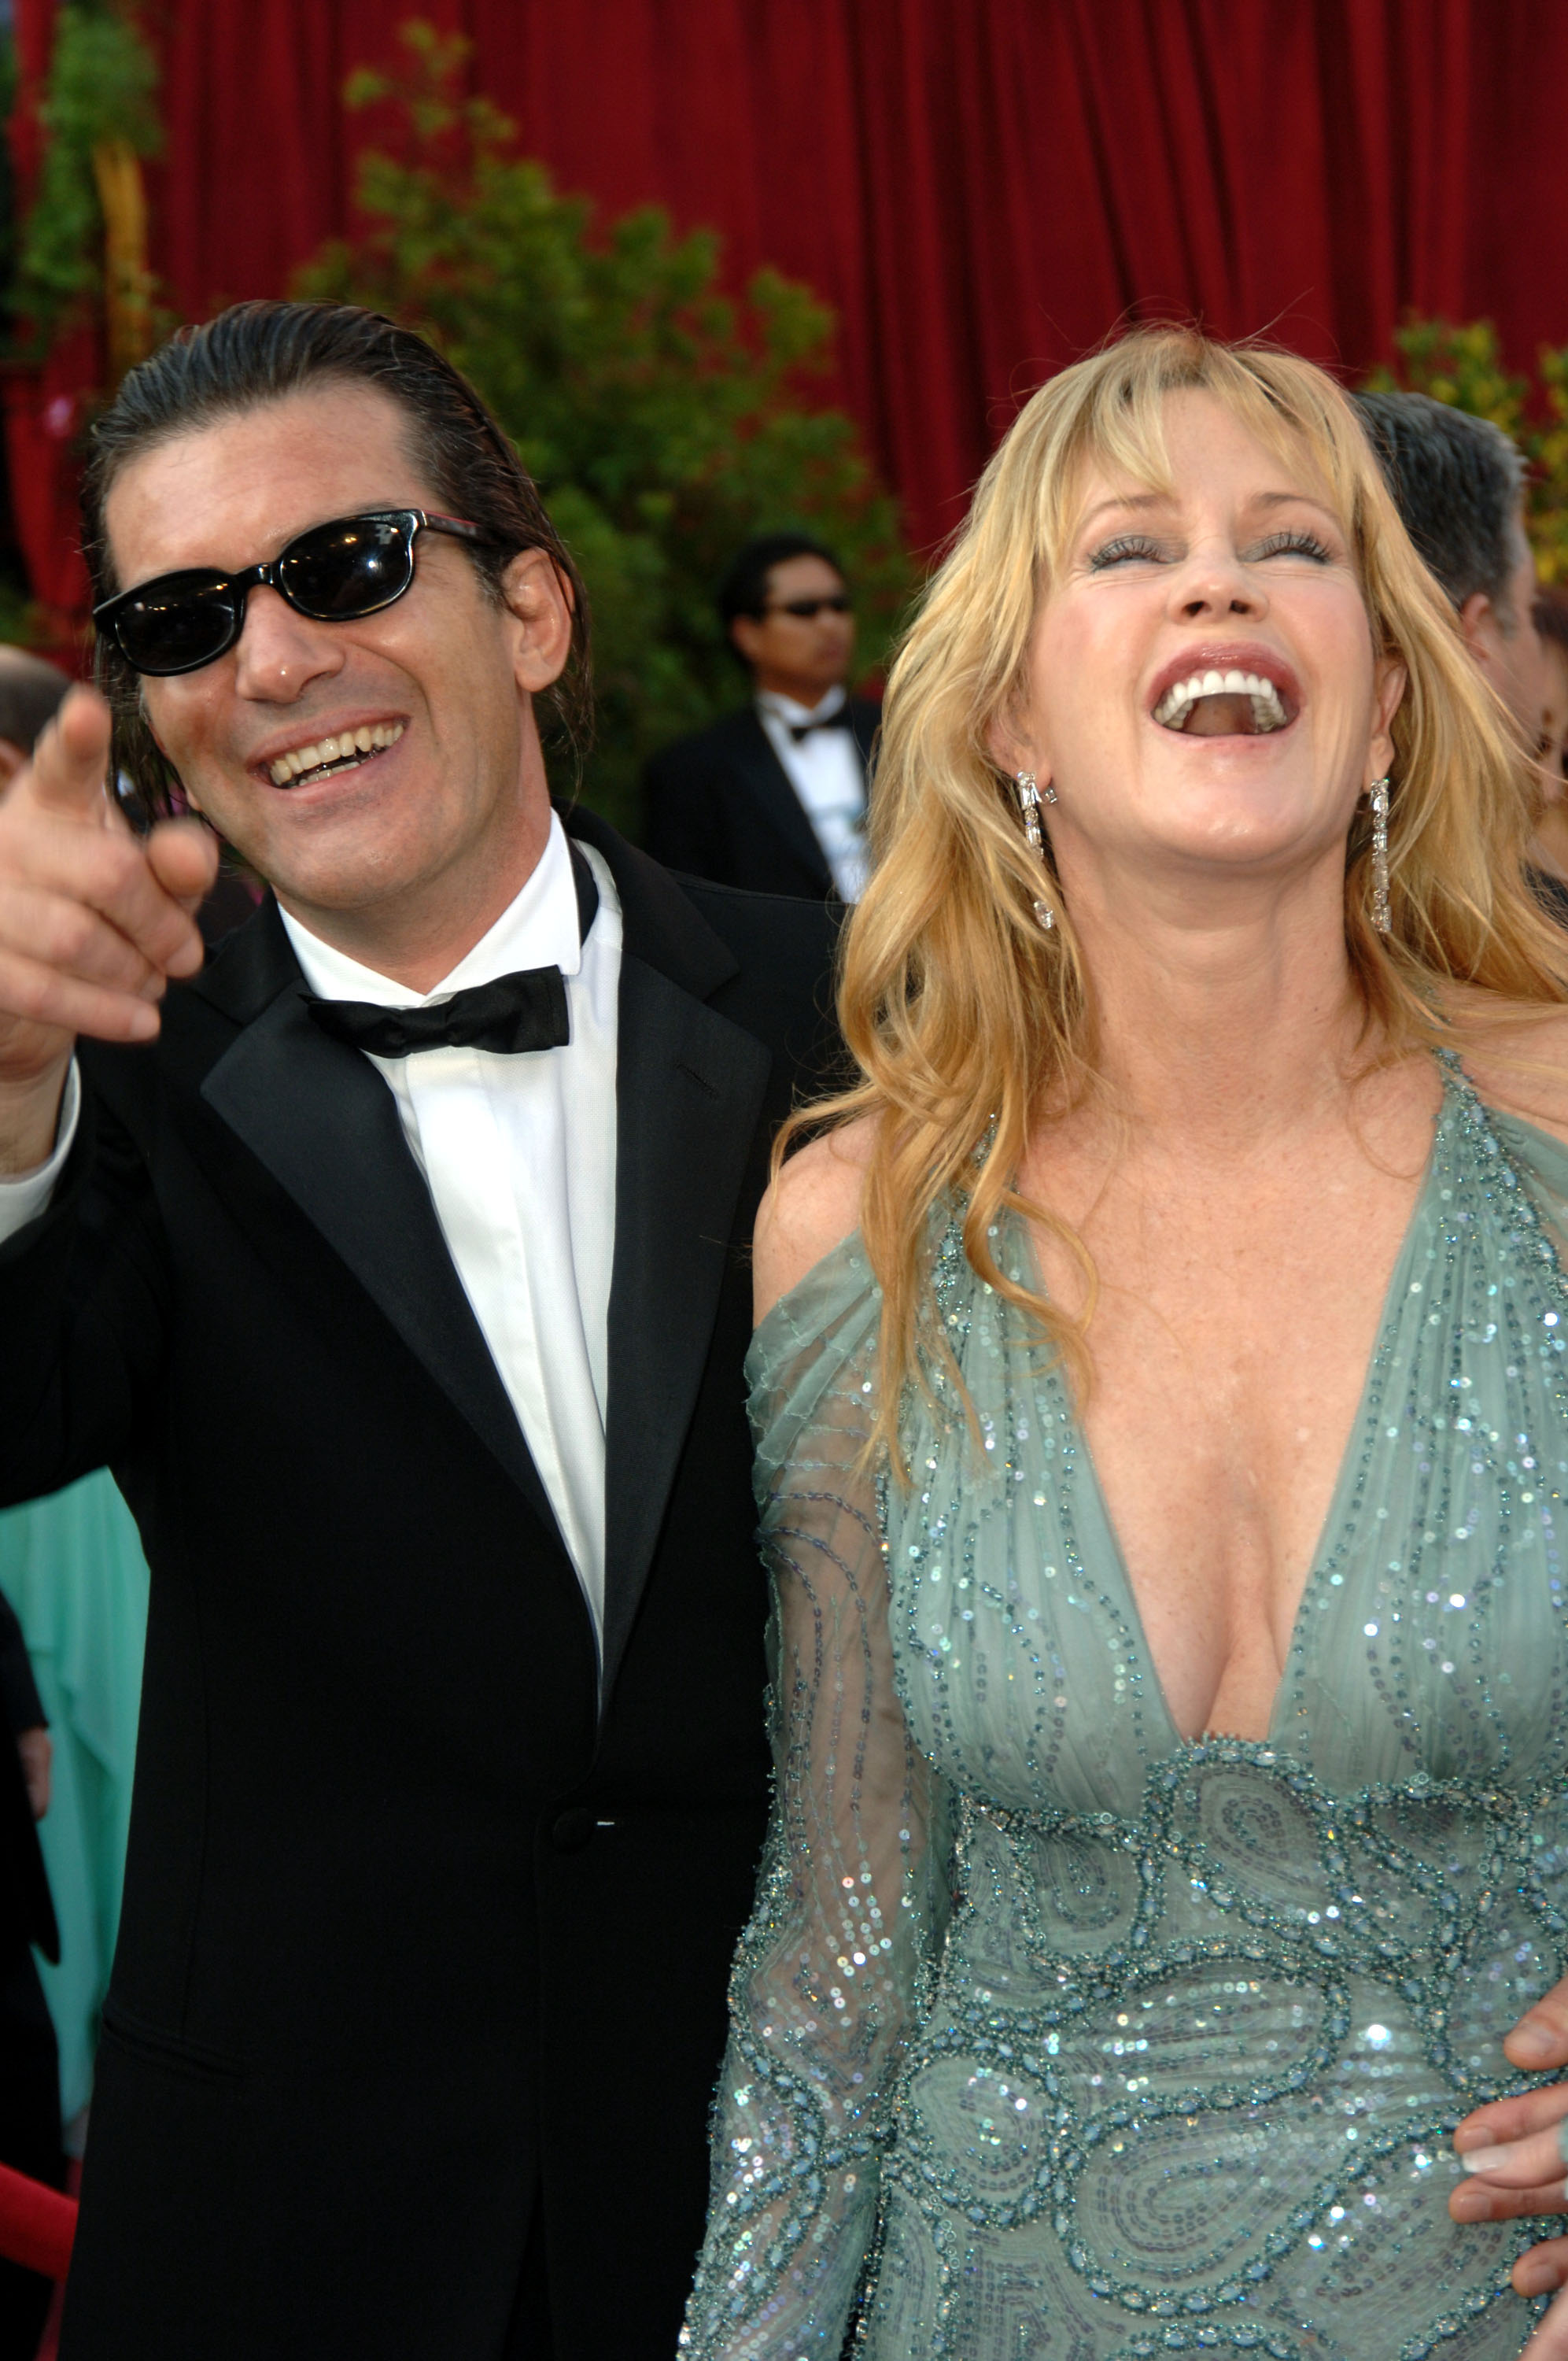 Antonio Banderas and Melanie Griffith at the 77th Annual Academy Awards in Los Angeles, California in 2005 | Source: Getty Images